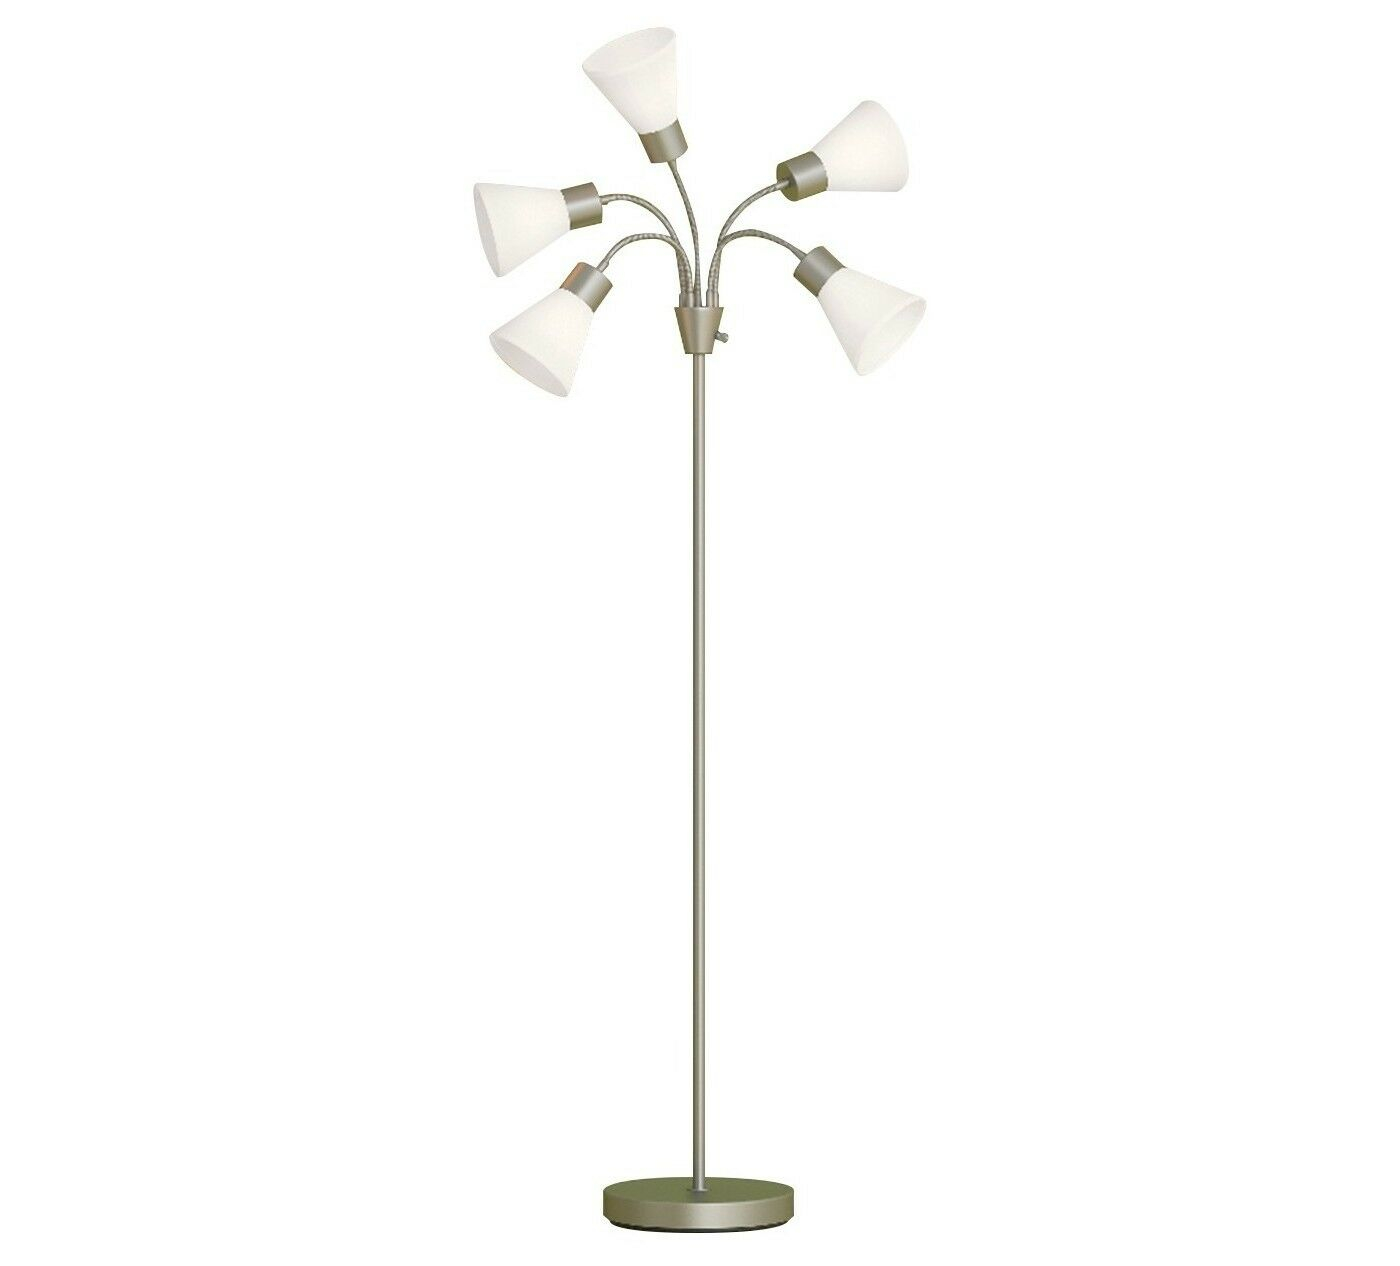 Details About Bright Light Dorm Room Essentials 5 Head Tall Floor Lamp Flexible Gooseneck Arms inside sizing 1400 X 1266